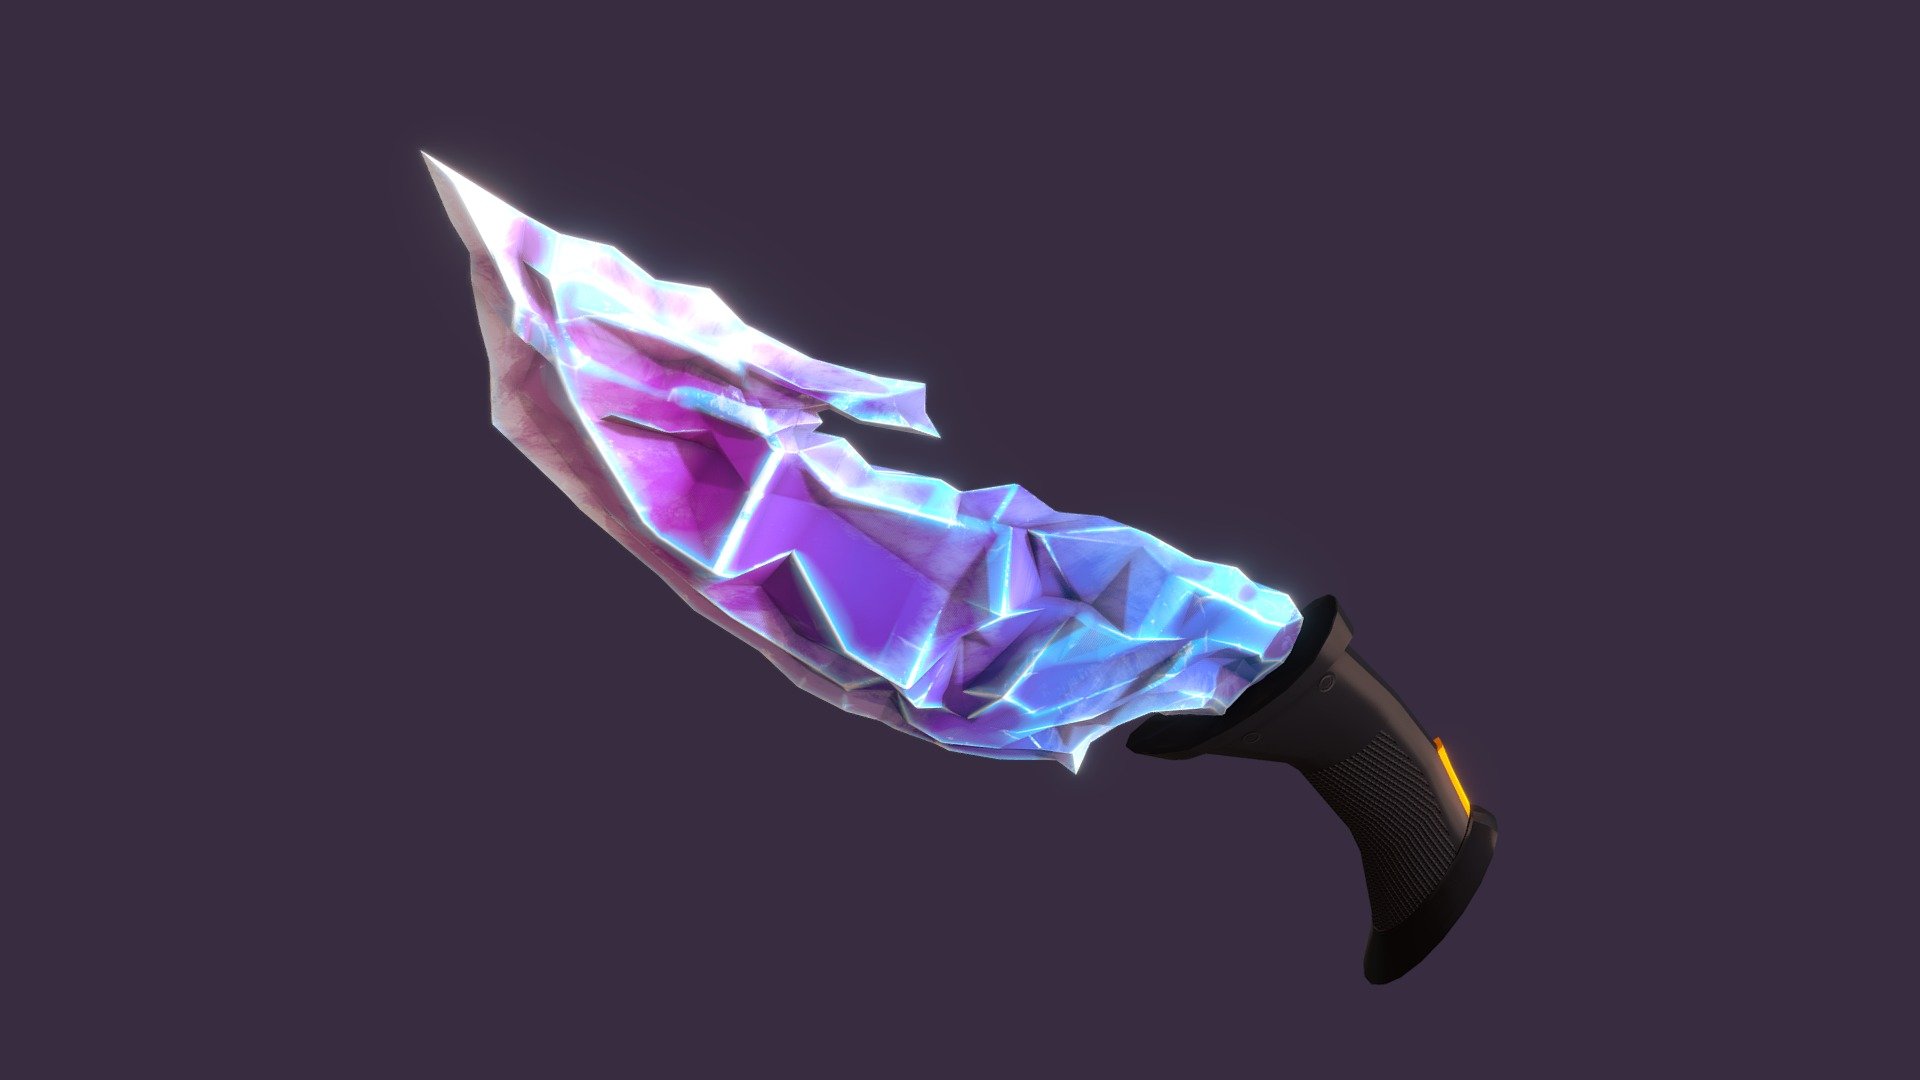 I made a skin of the knife from the game VALORANT.

The knife just 1 texture, 2 maps  (The Ice Texture) and 2 materials.

No UVS 3d model